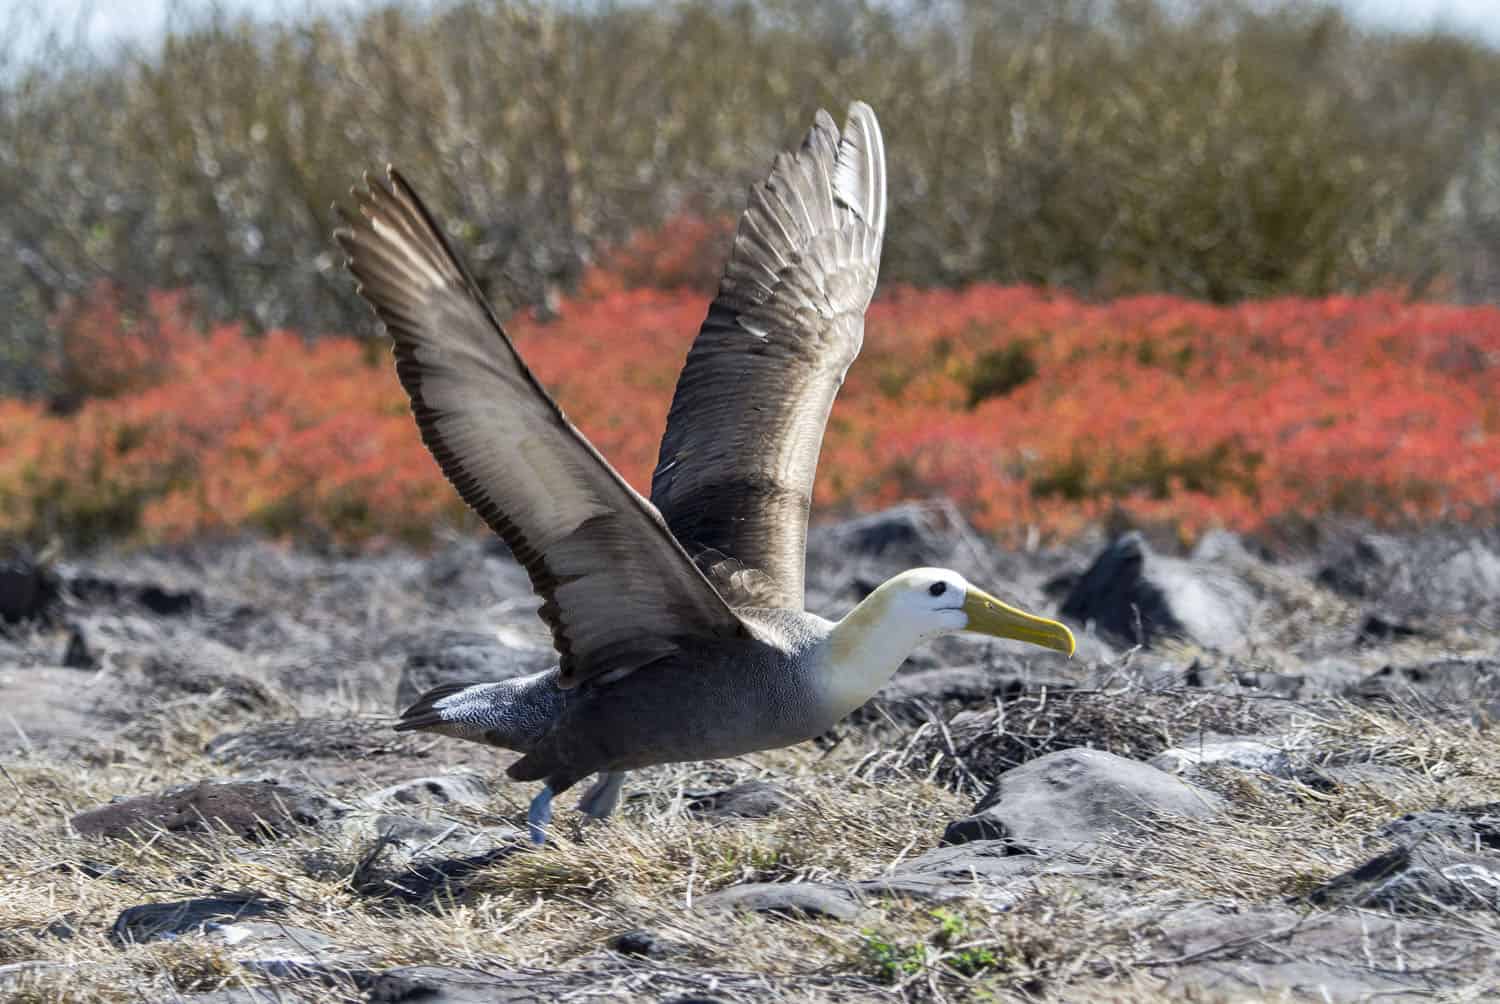 Waved Albatross at Punta Suarez. Photo by Donna Ikenberry.